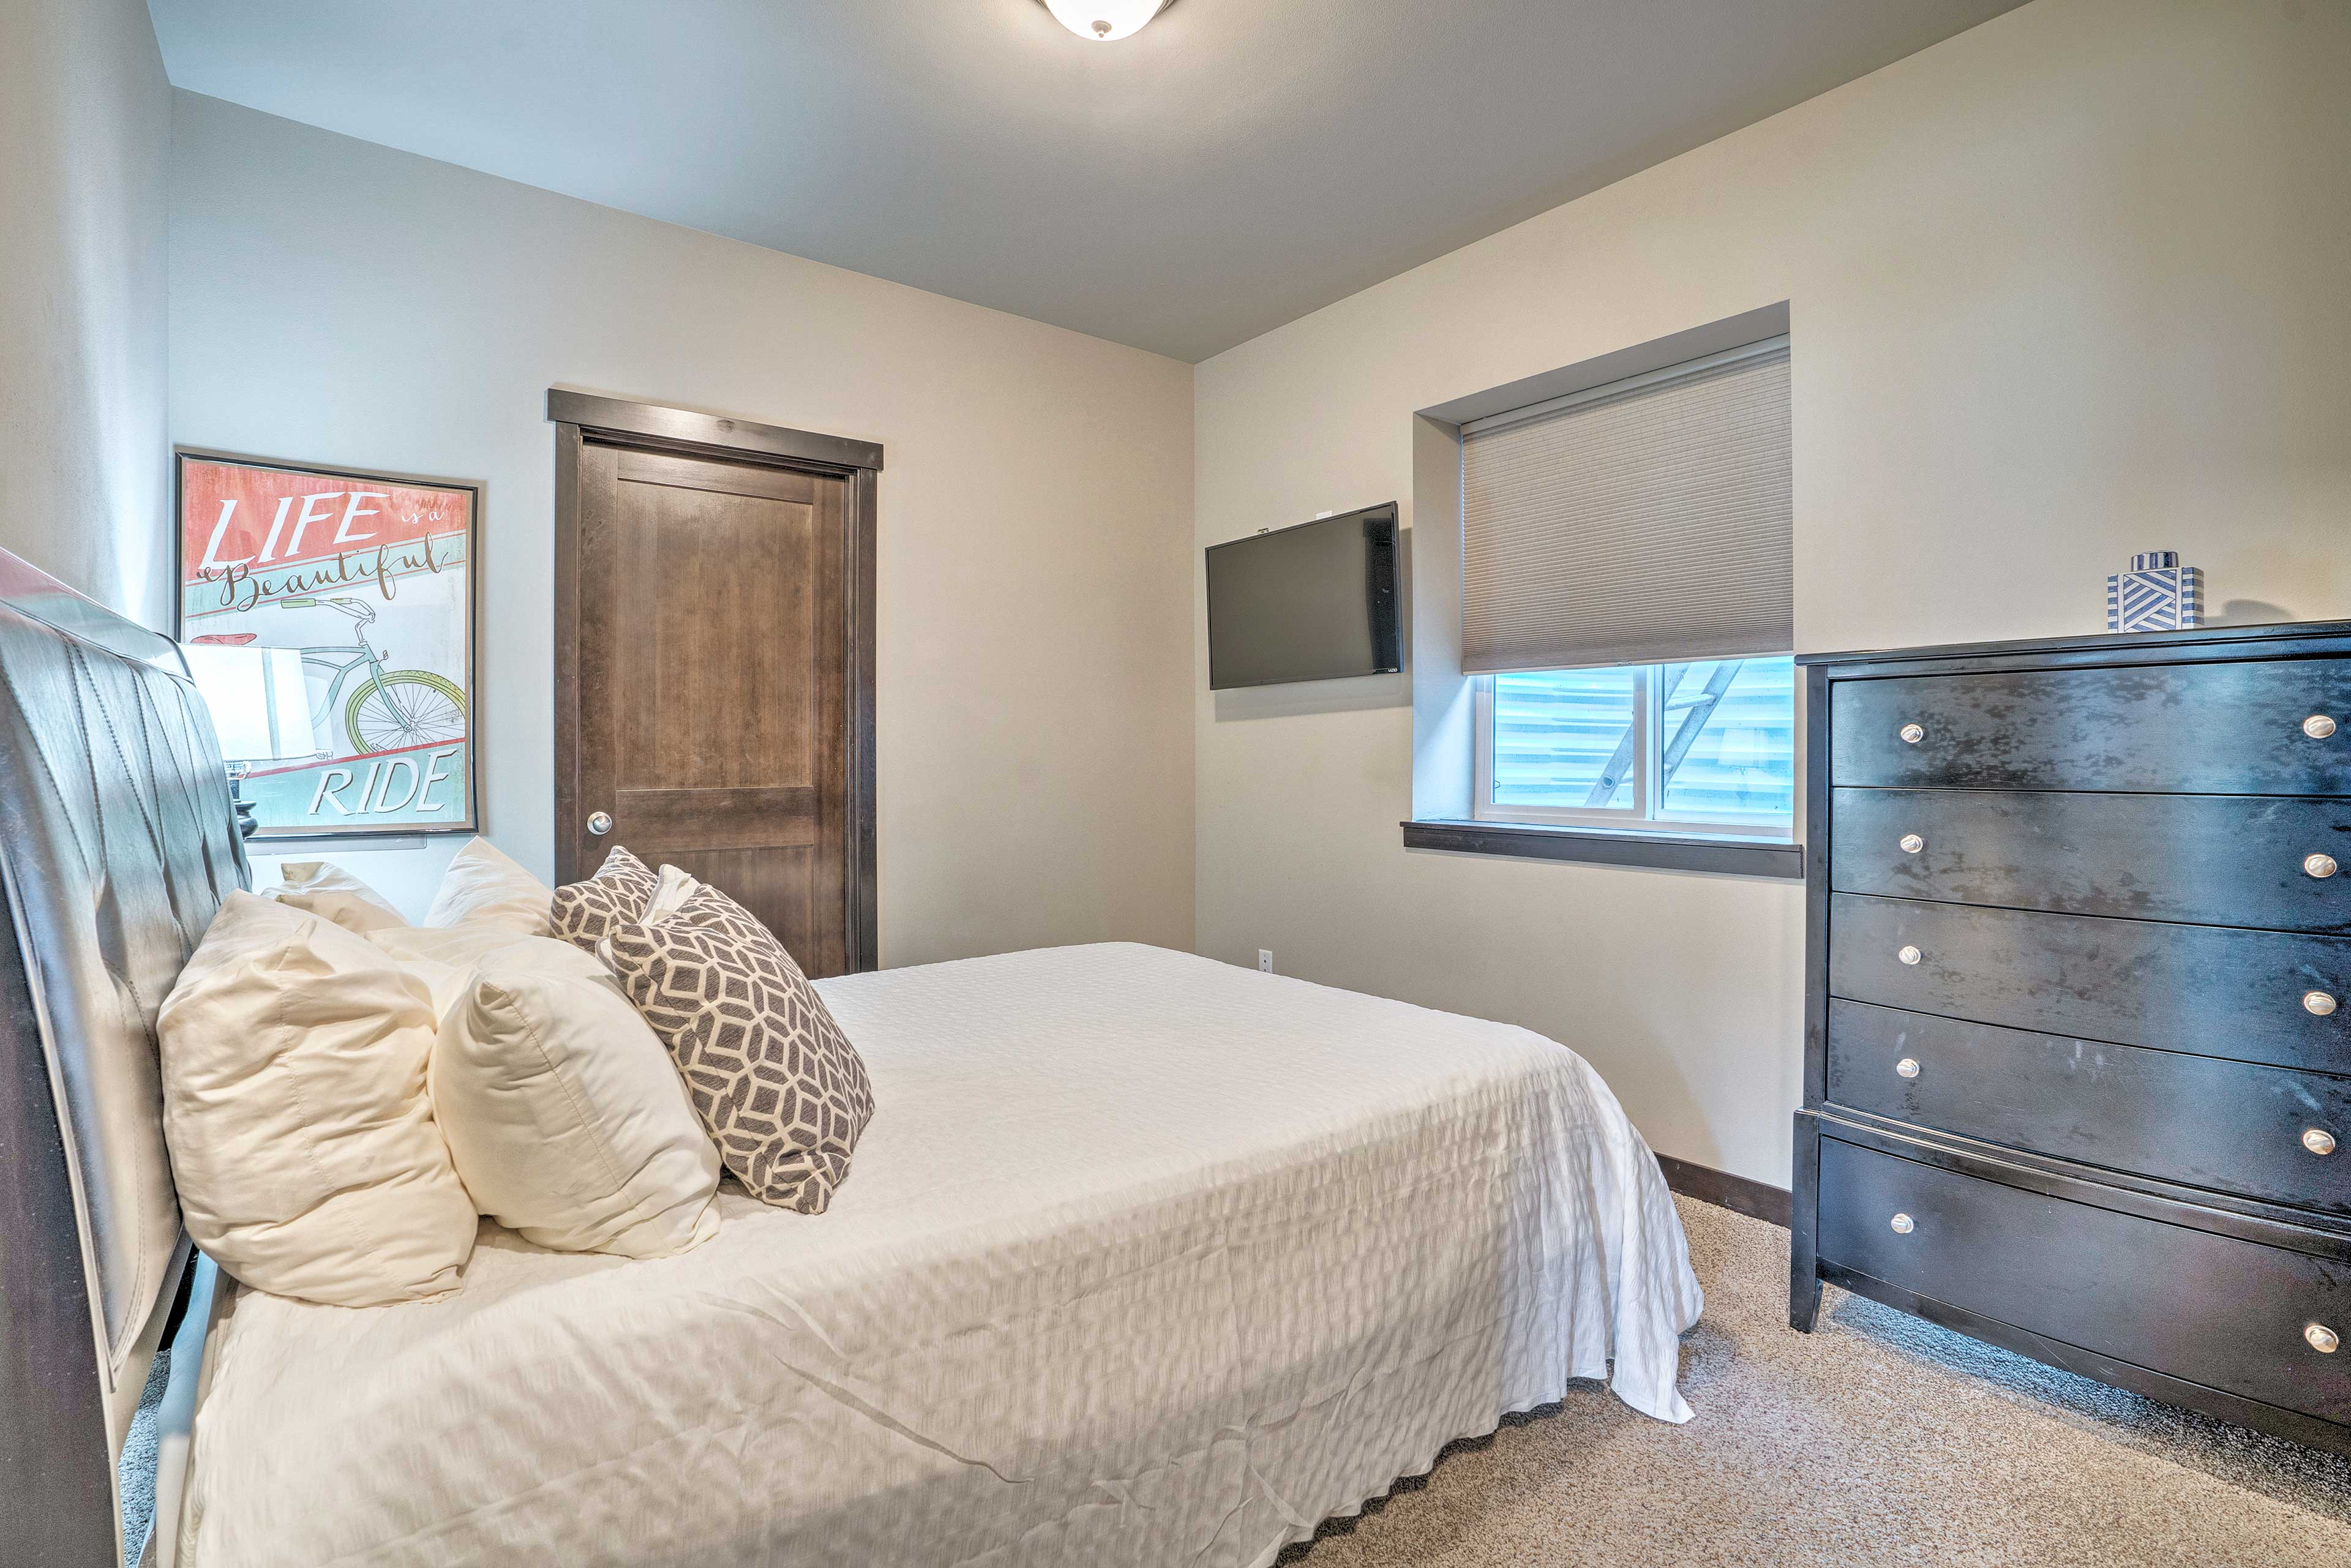 The first bedroom provides a queen bed and flat-screen TV.